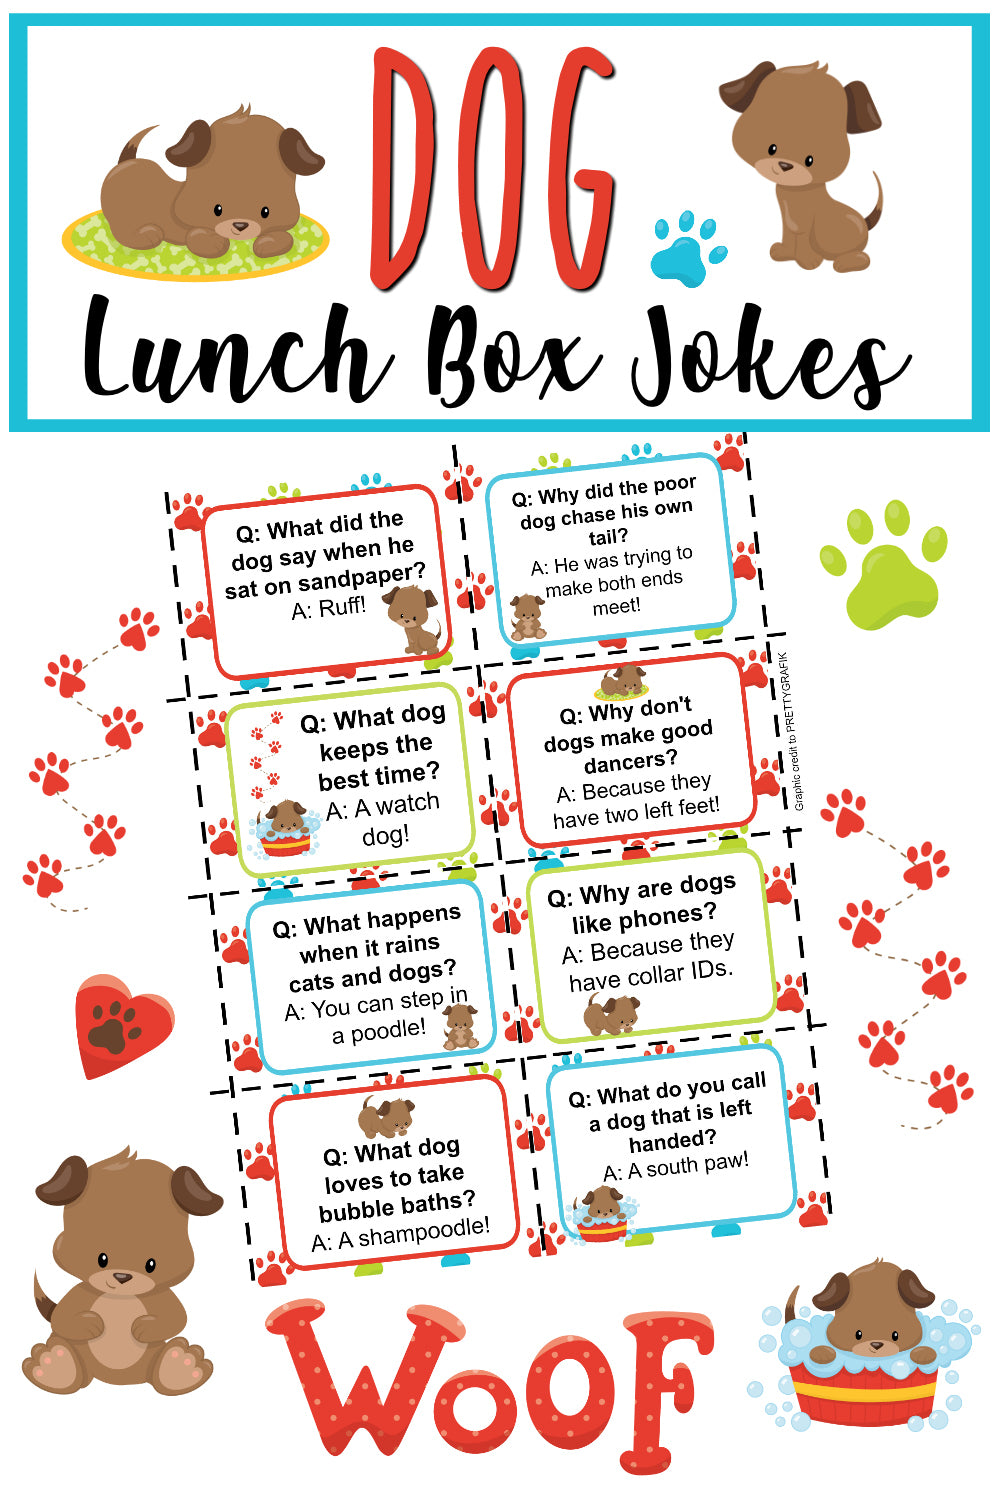 Dinosaur Lunch Box Notes your kid will love to find in their lunch!